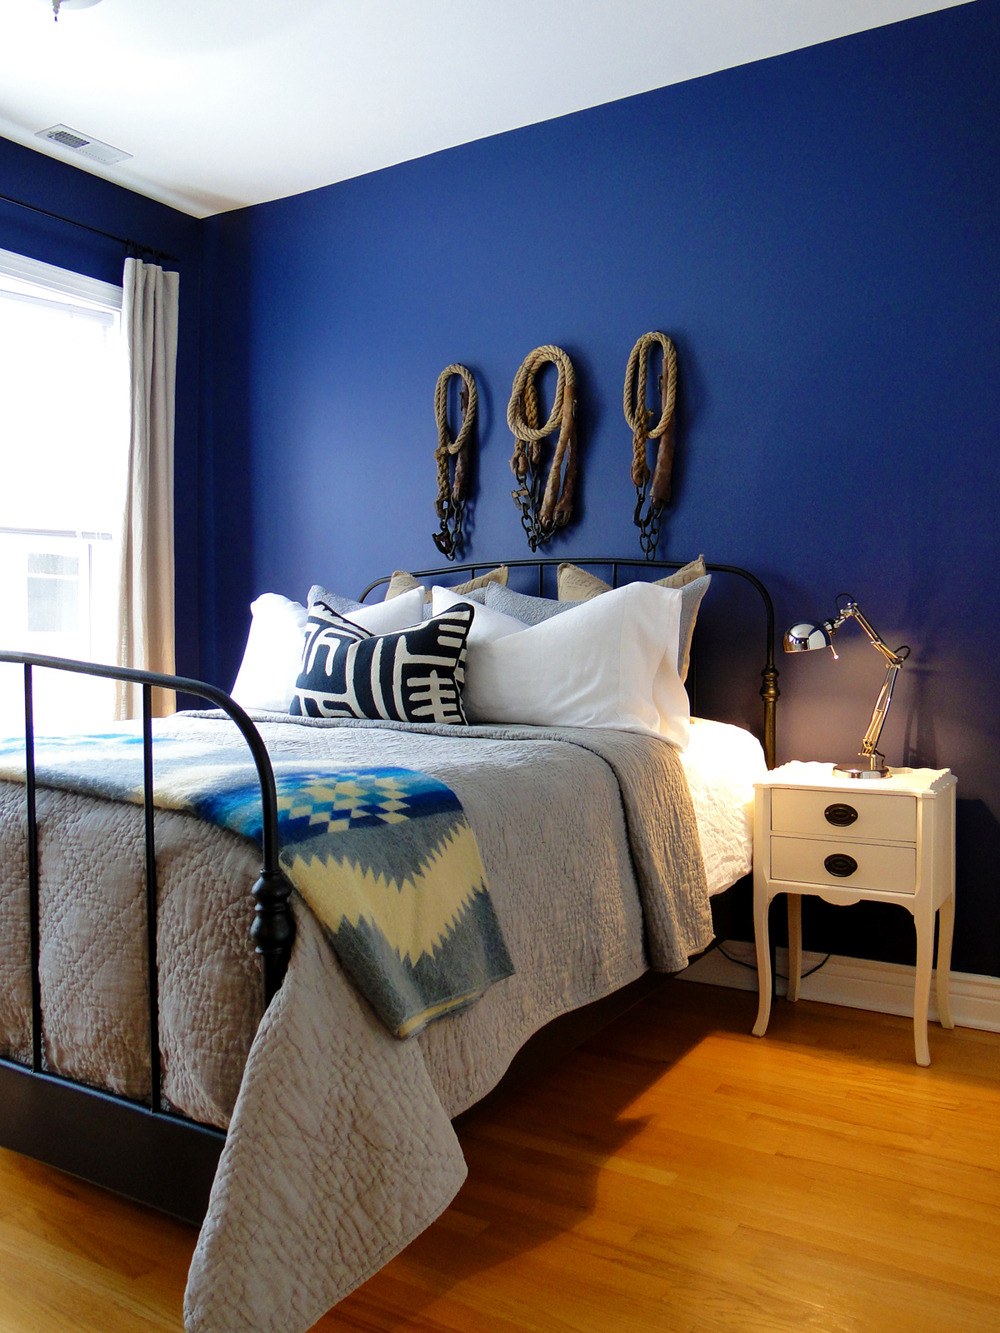 Bedroom paint colors 20 bold & beautiful blue wall paint colors |  Apartment therapy QDISJVE